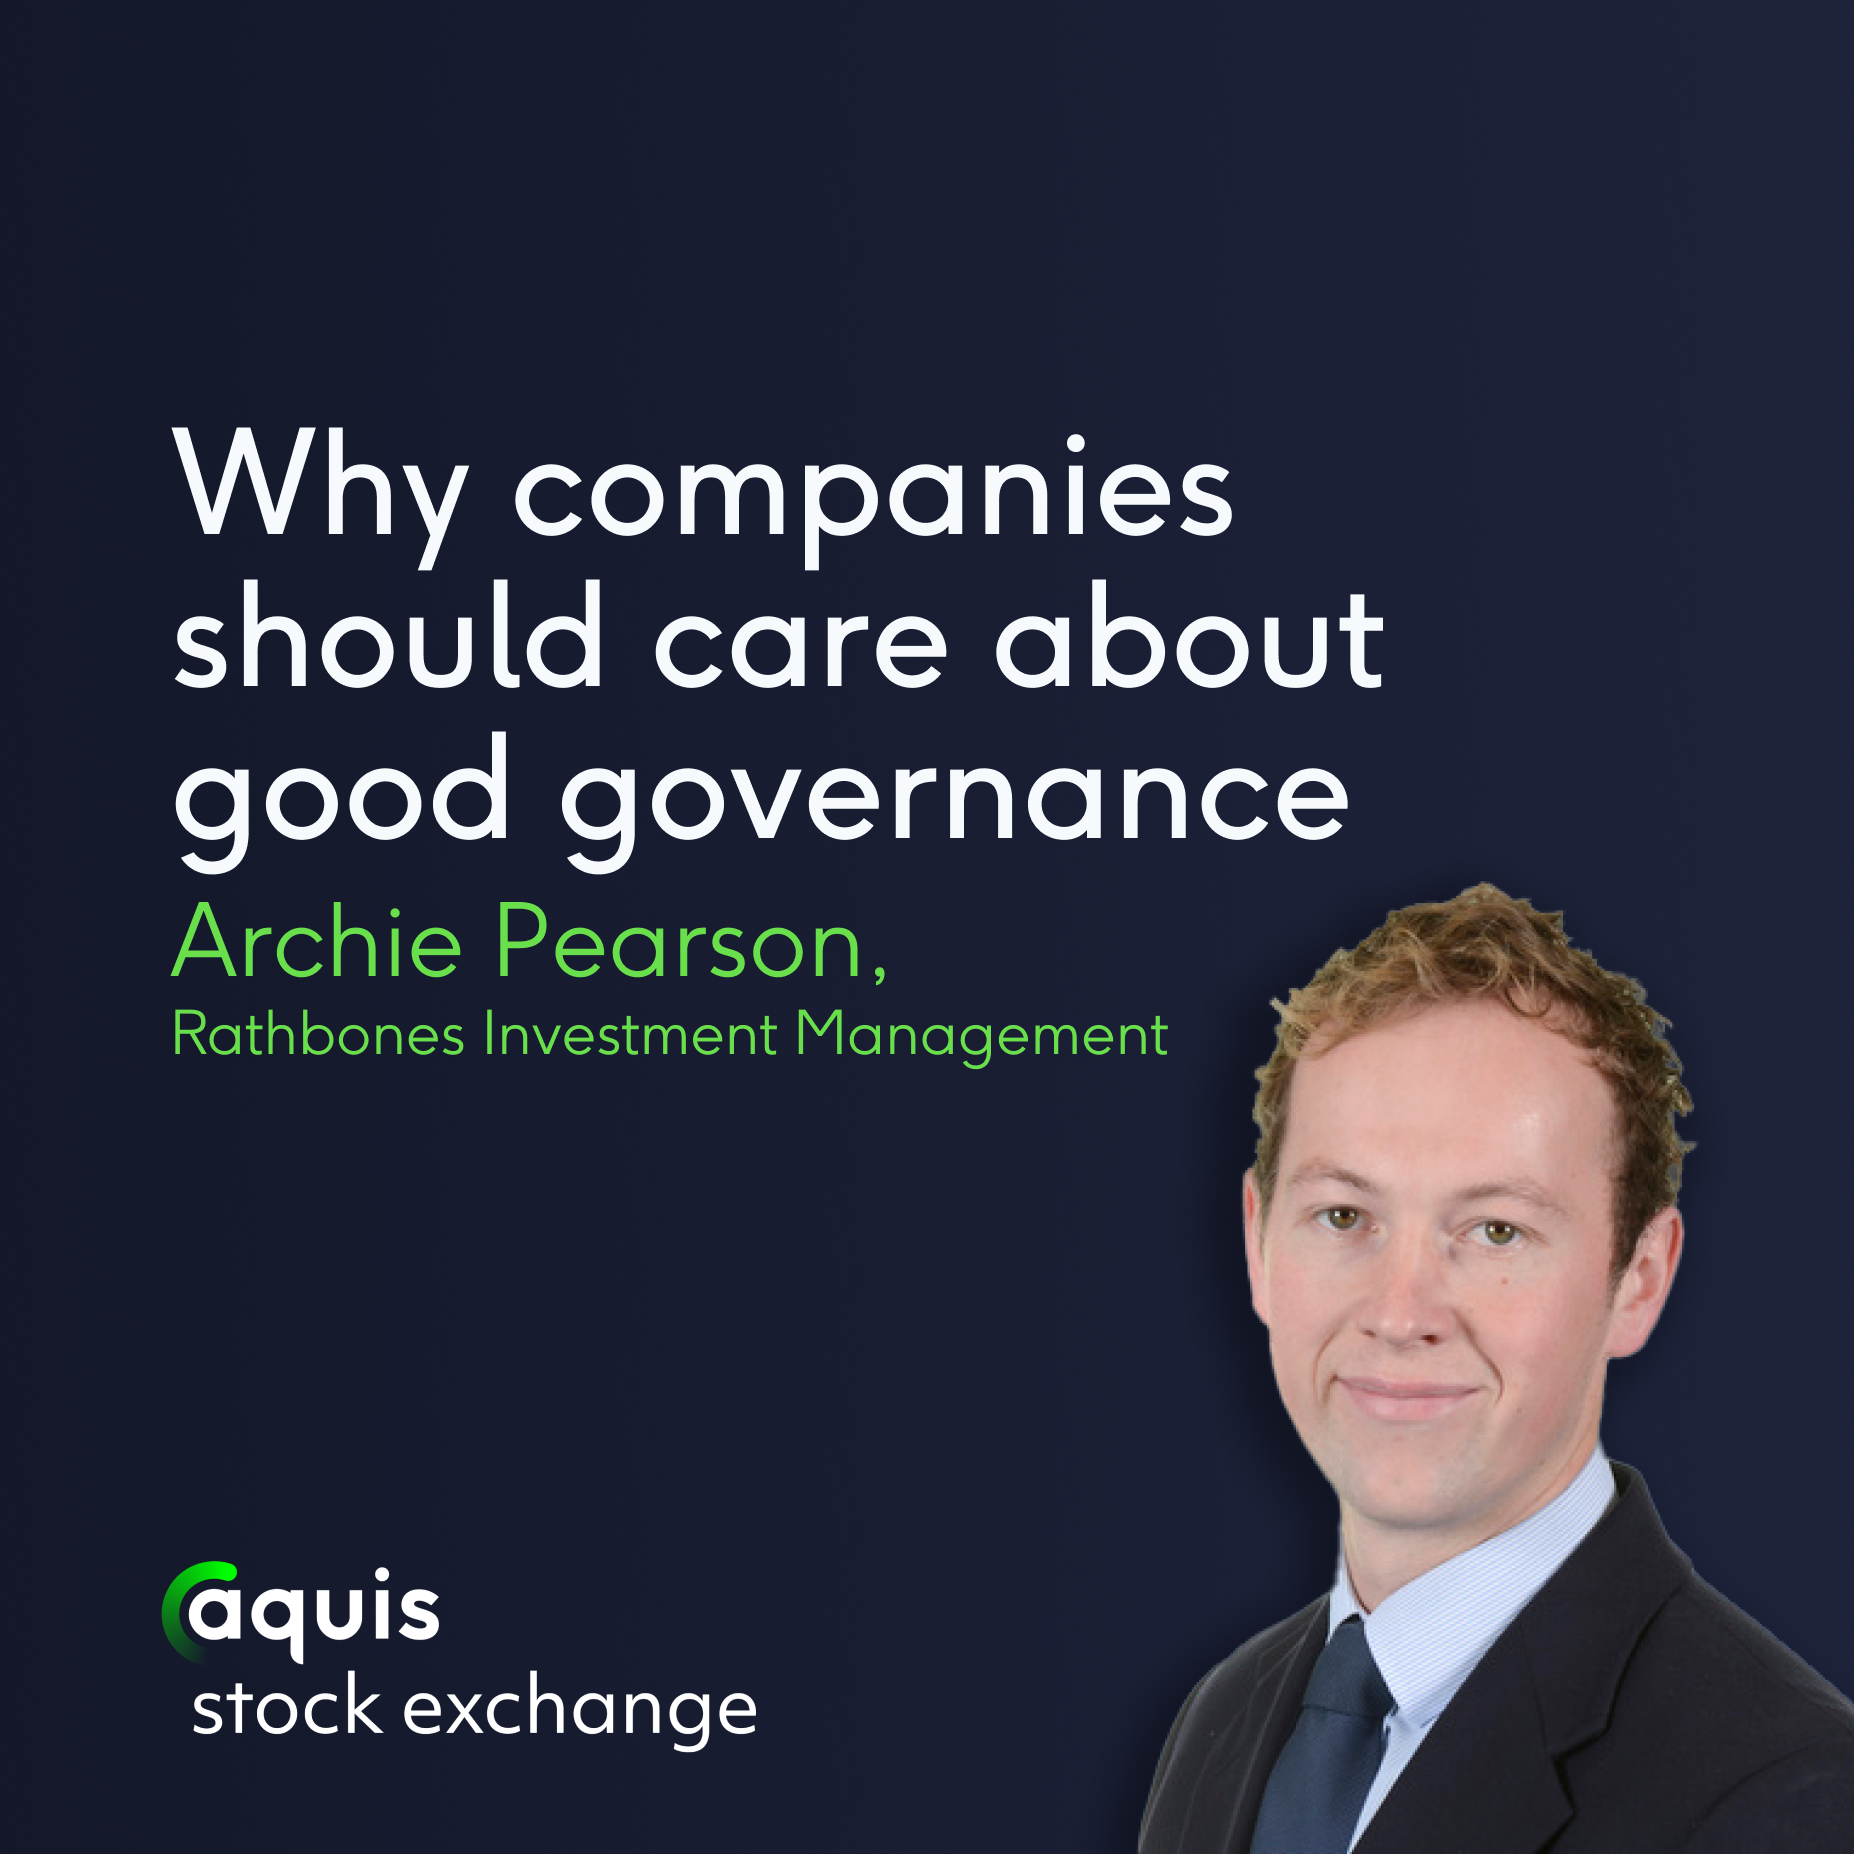 Why companies should care about good governance